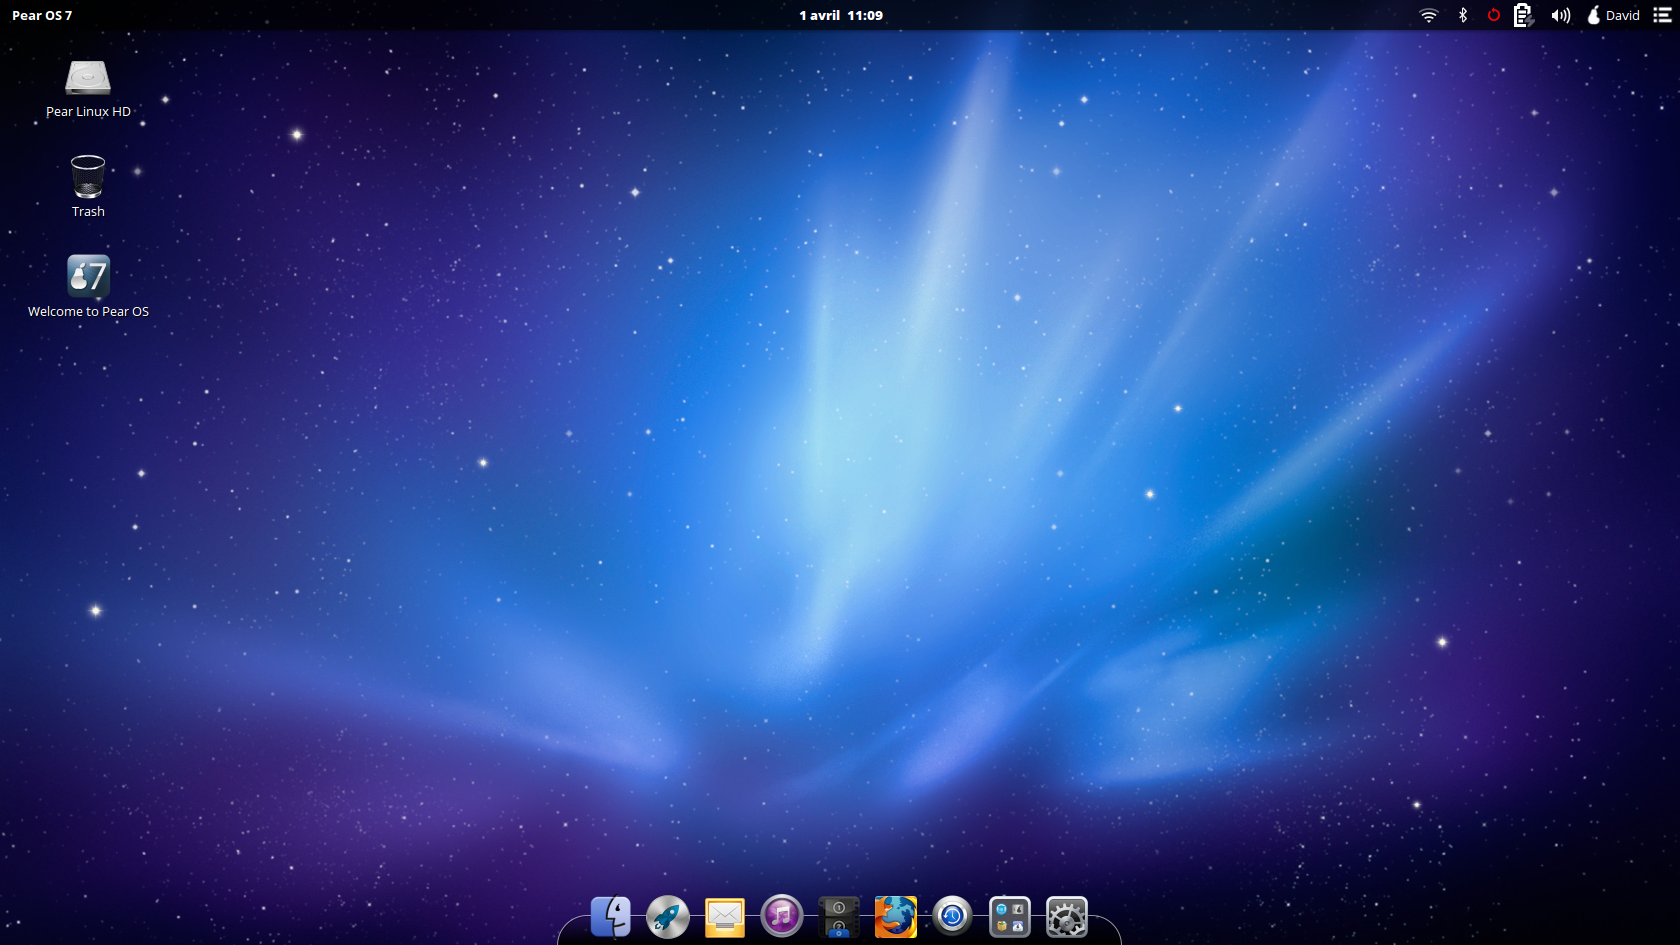 Switching from Mac to Linux made easy with Pear LInux